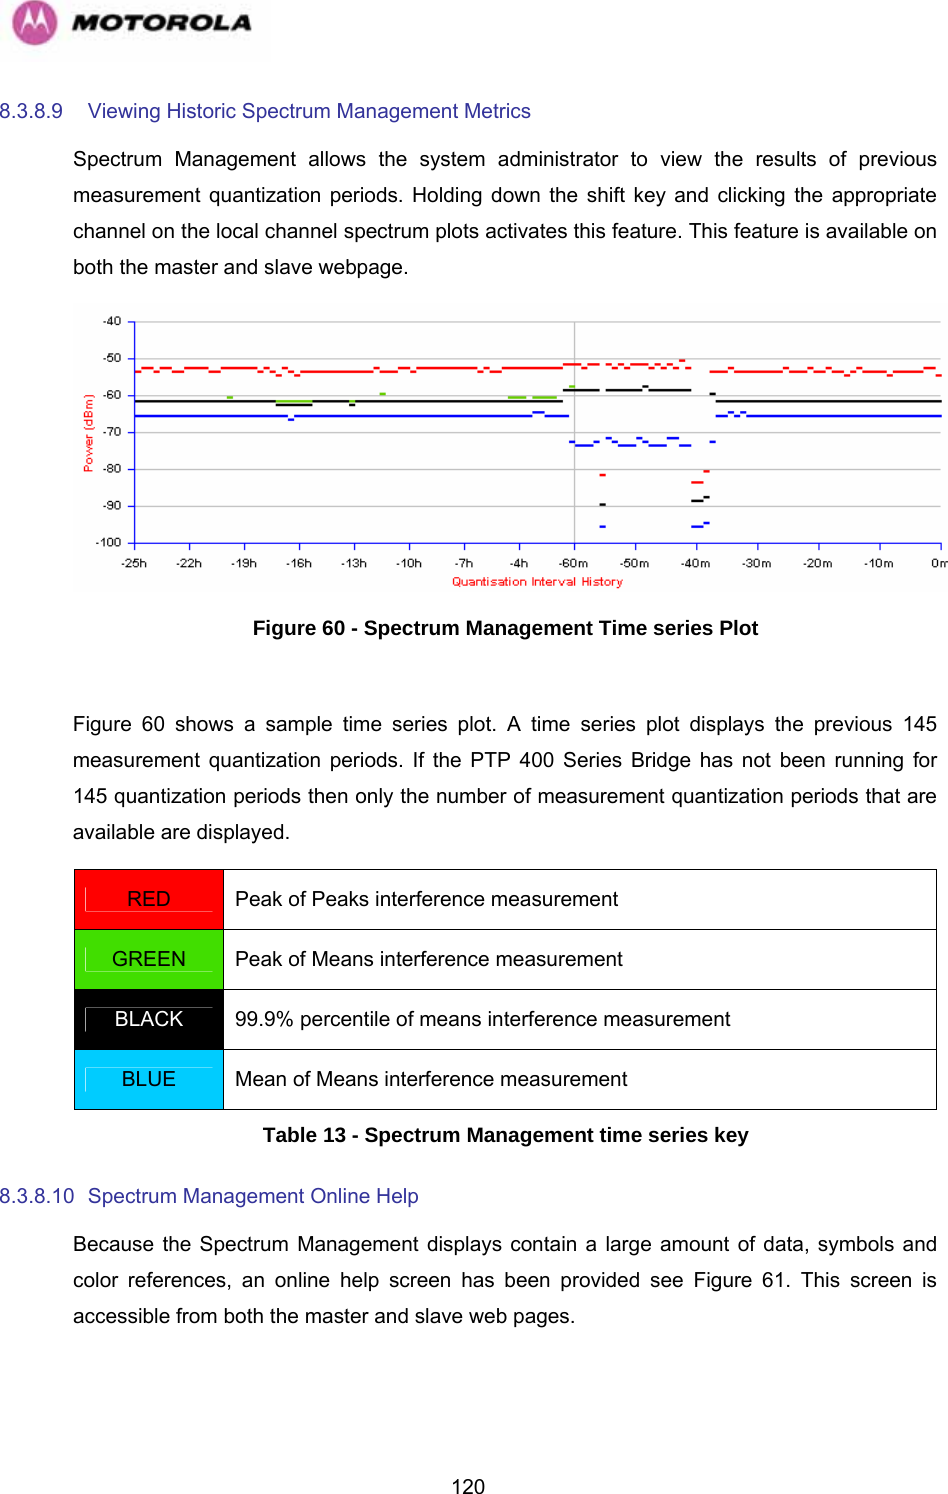   1208.3.8.9  Viewing Historic Spectrum Management Metrics  Spectrum Management allows the system administrator to view the results of previous measurement quantization periods. Holding down the shift key and clicking the appropriate channel on the local channel spectrum plots activates this feature. This feature is available on both the master and slave webpage.   Figure 60 - Spectrum Management Time series Plot  Figure 60 shows a sample time series plot. A time series plot displays the previous 145 measurement quantization periods. If the PTP 400 Series Bridge has not been running for 145 quantization periods then only the number of measurement quantization periods that are available are displayed.  RED  Peak of Peaks interference measurement GREEN  Peak of Means interference measurement BLACK  99.9% percentile of means interference measurement BLUE  Mean of Means interference measurement Table 13 - Spectrum Management time series key 8.3.8.10  Spectrum Management Online Help  Because the Spectrum Management displays contain a large amount of data, symbols and color references, an online help screen has been provided see Figure 61. This screen is accessible from both the master and slave web pages. 